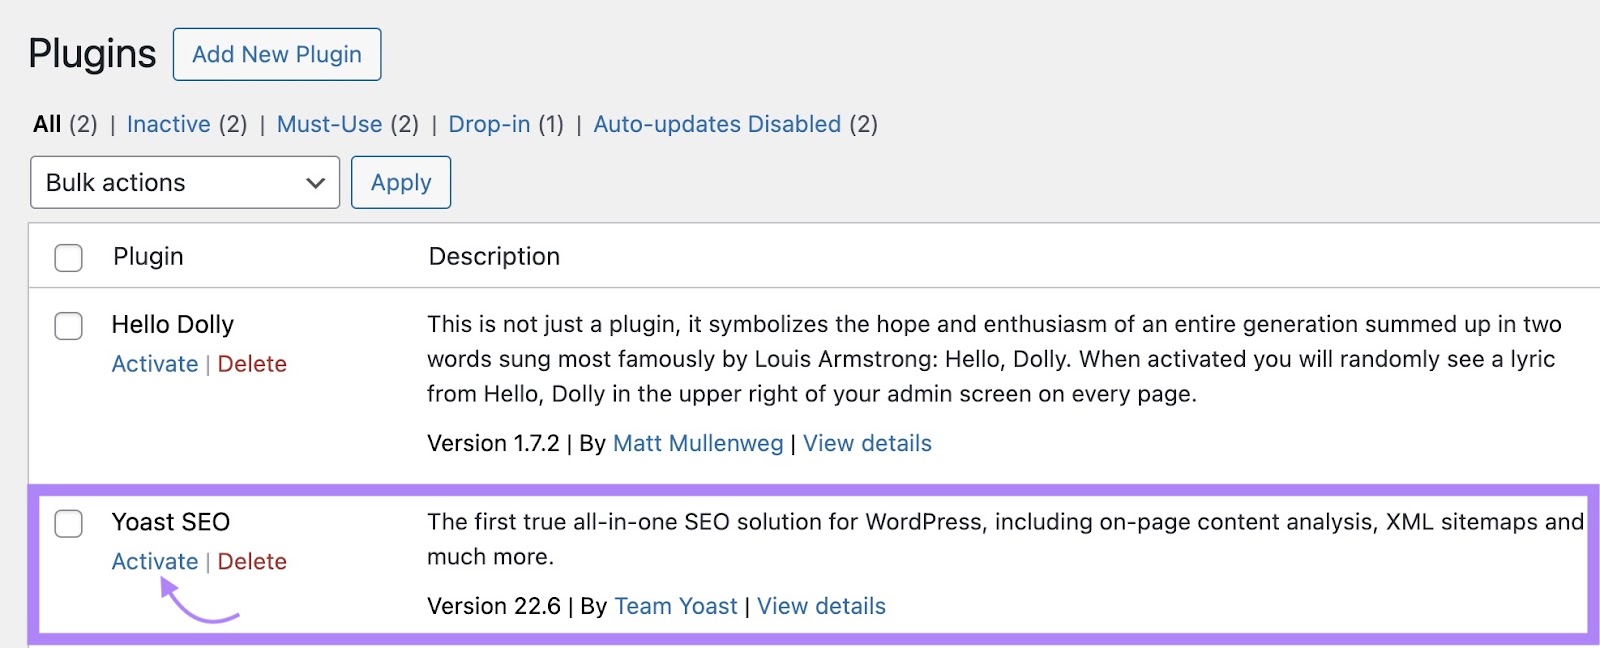 Plugins page on WordPress dashboard showing a highlight around 'Yoast SEO' with the 'Activate' button clicked.